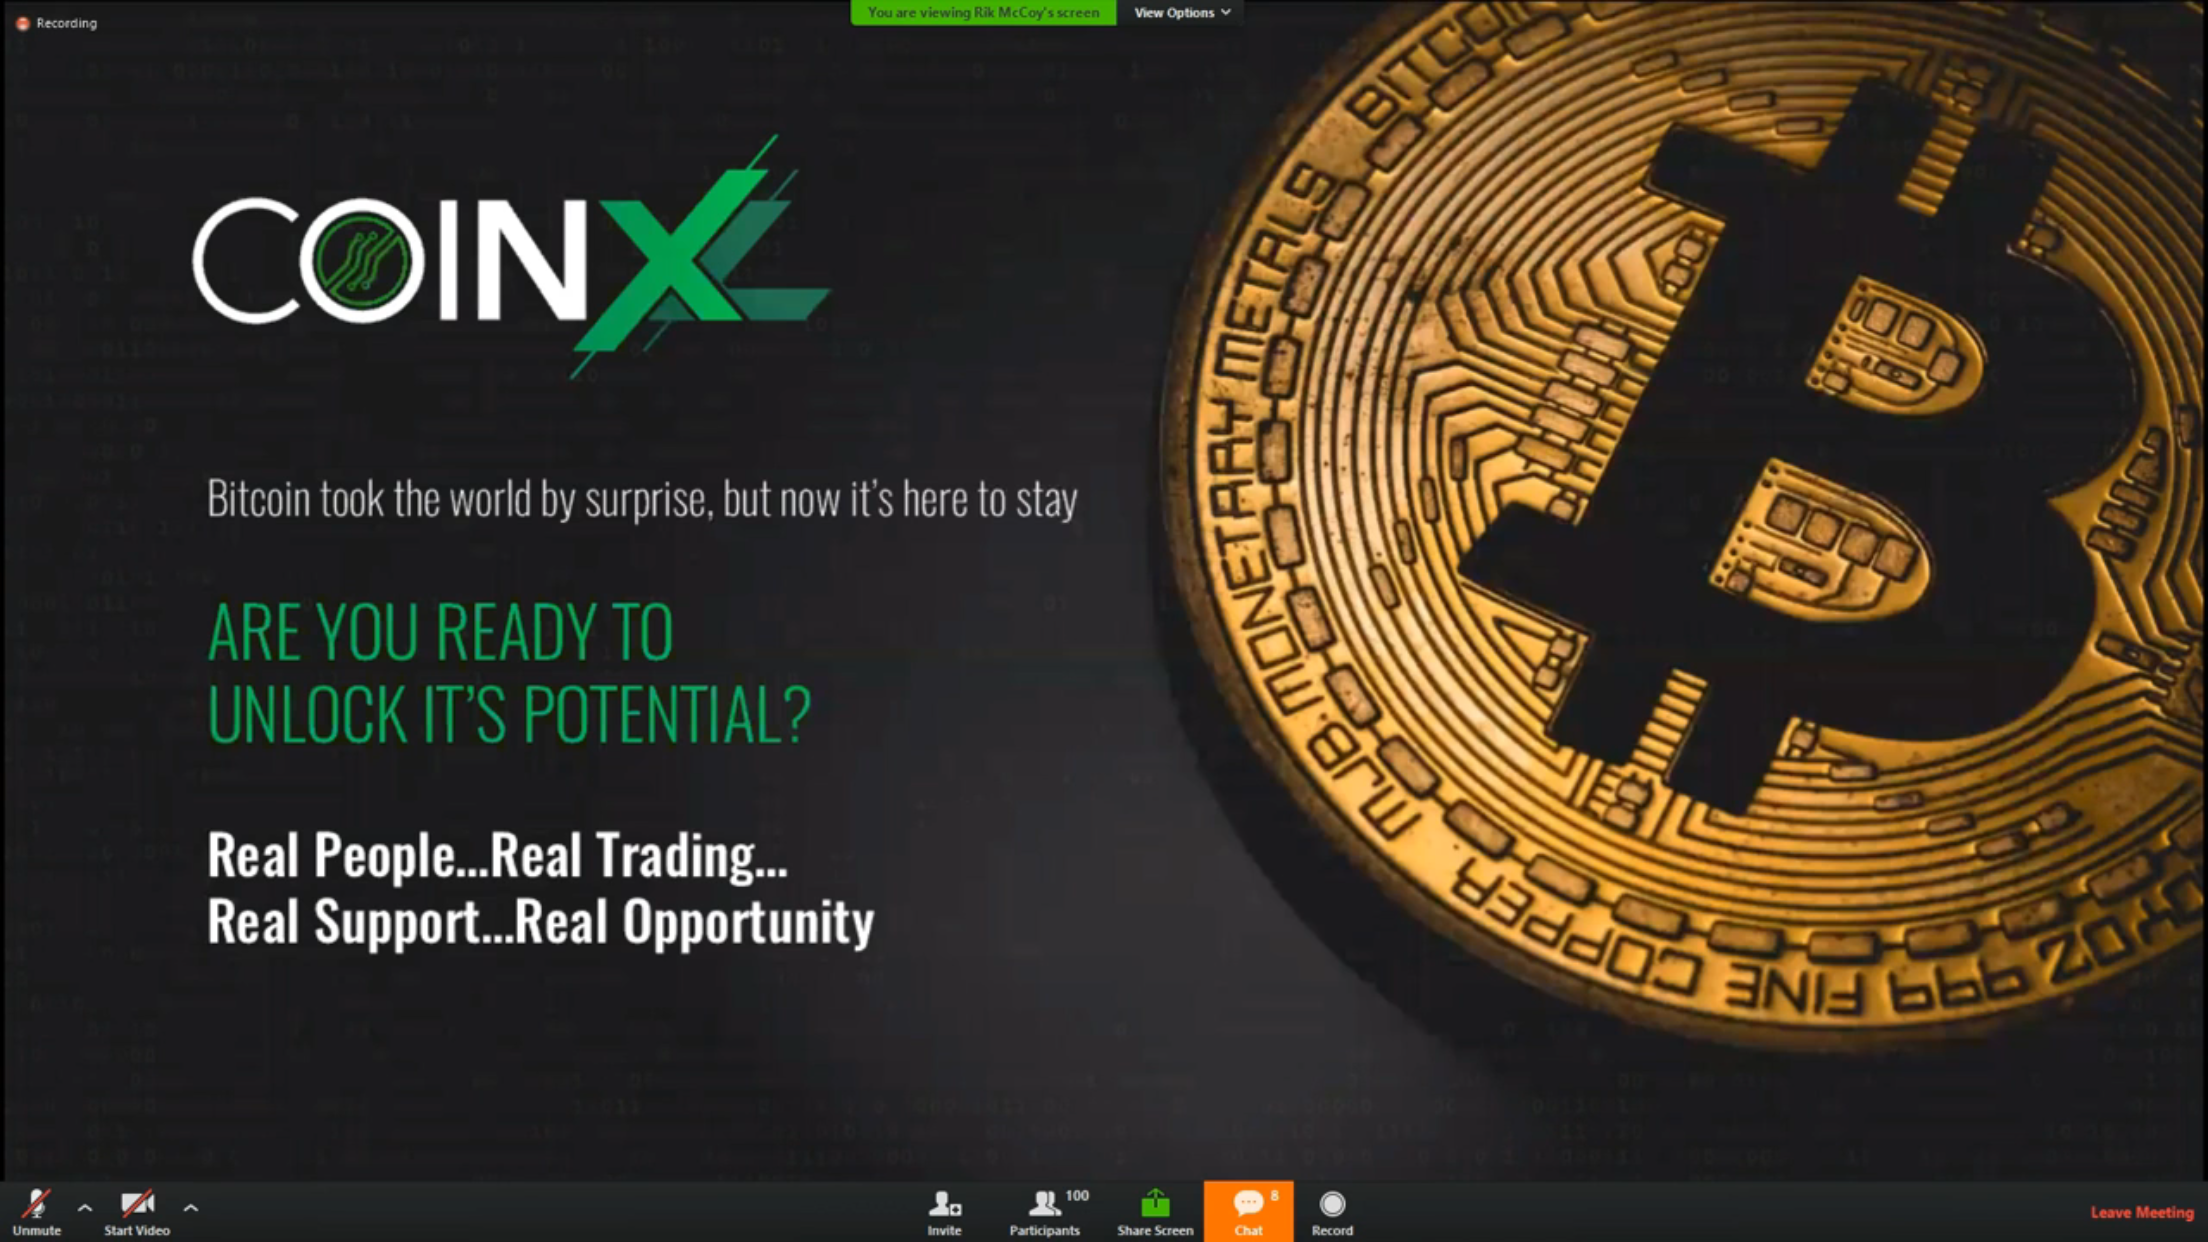 Scam Alert Is This The Most Well Put Together Bitcoin Scam Site Yet - 